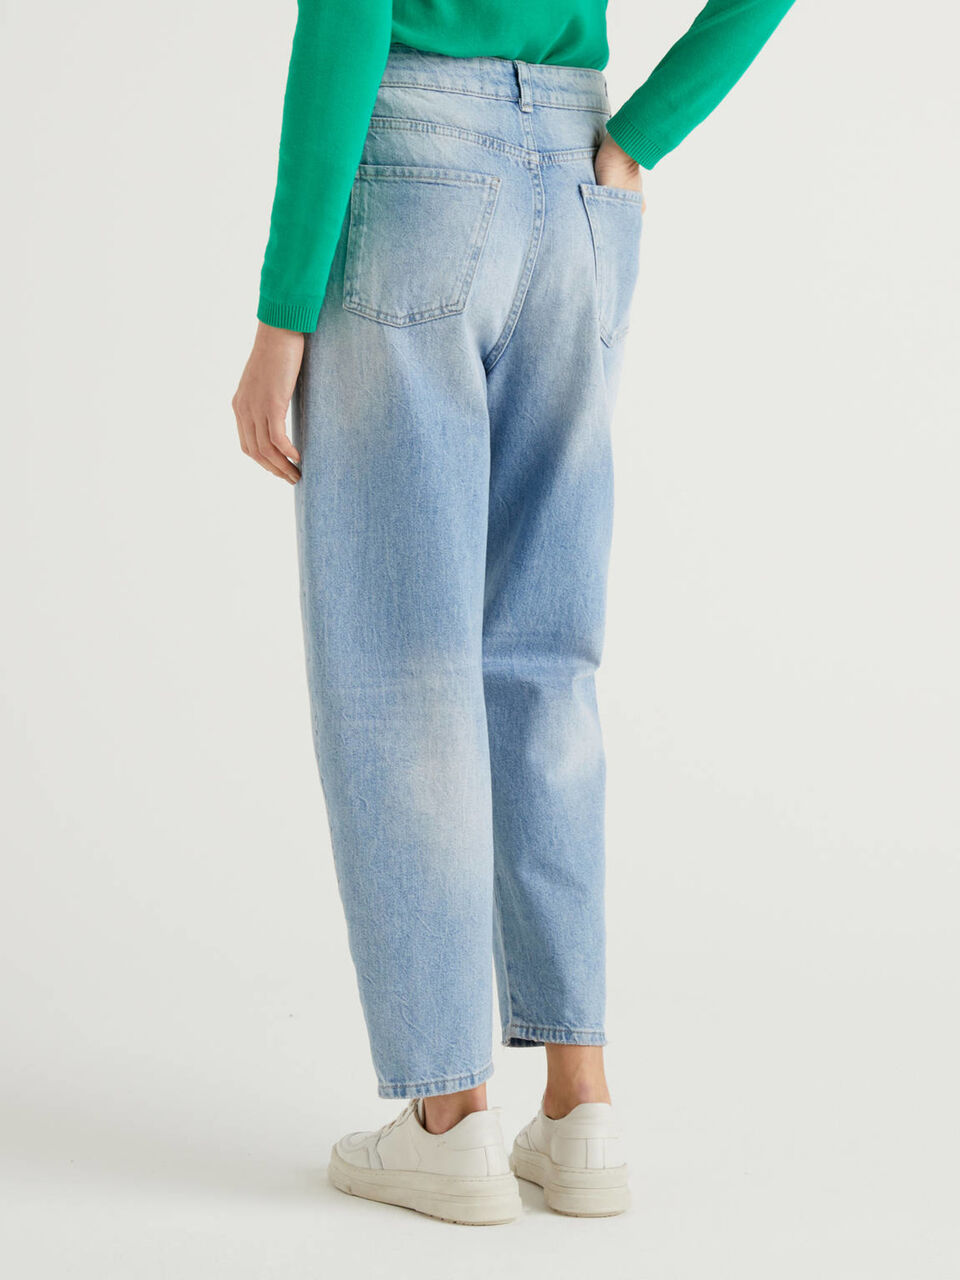 Carrot fit jeans in 100% cotton denim